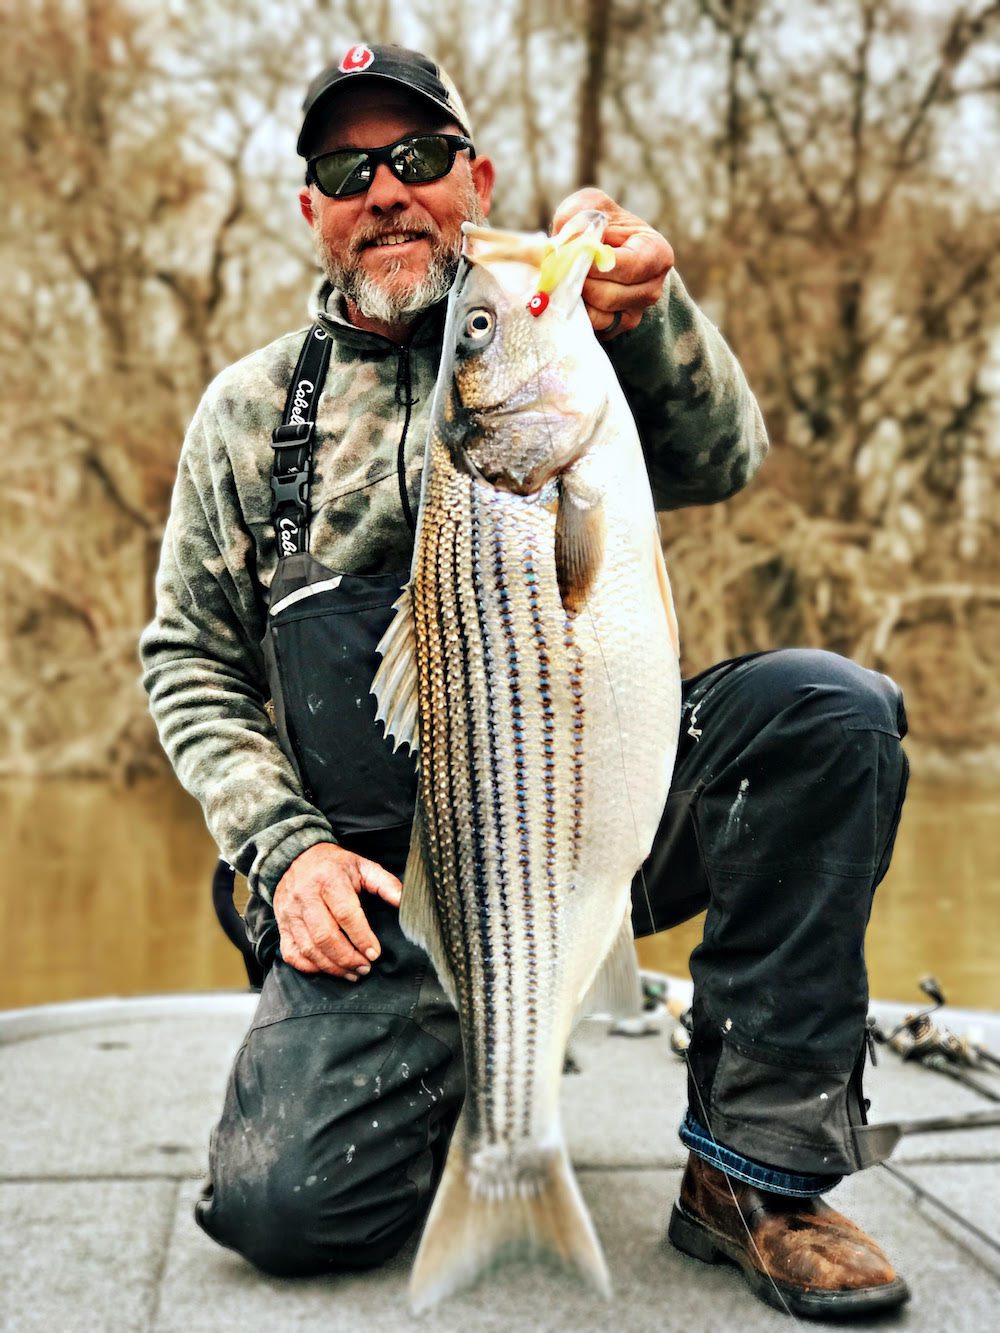 February 2022 Roanoke River NC Fishing Report by Capt. Scooter Lilley